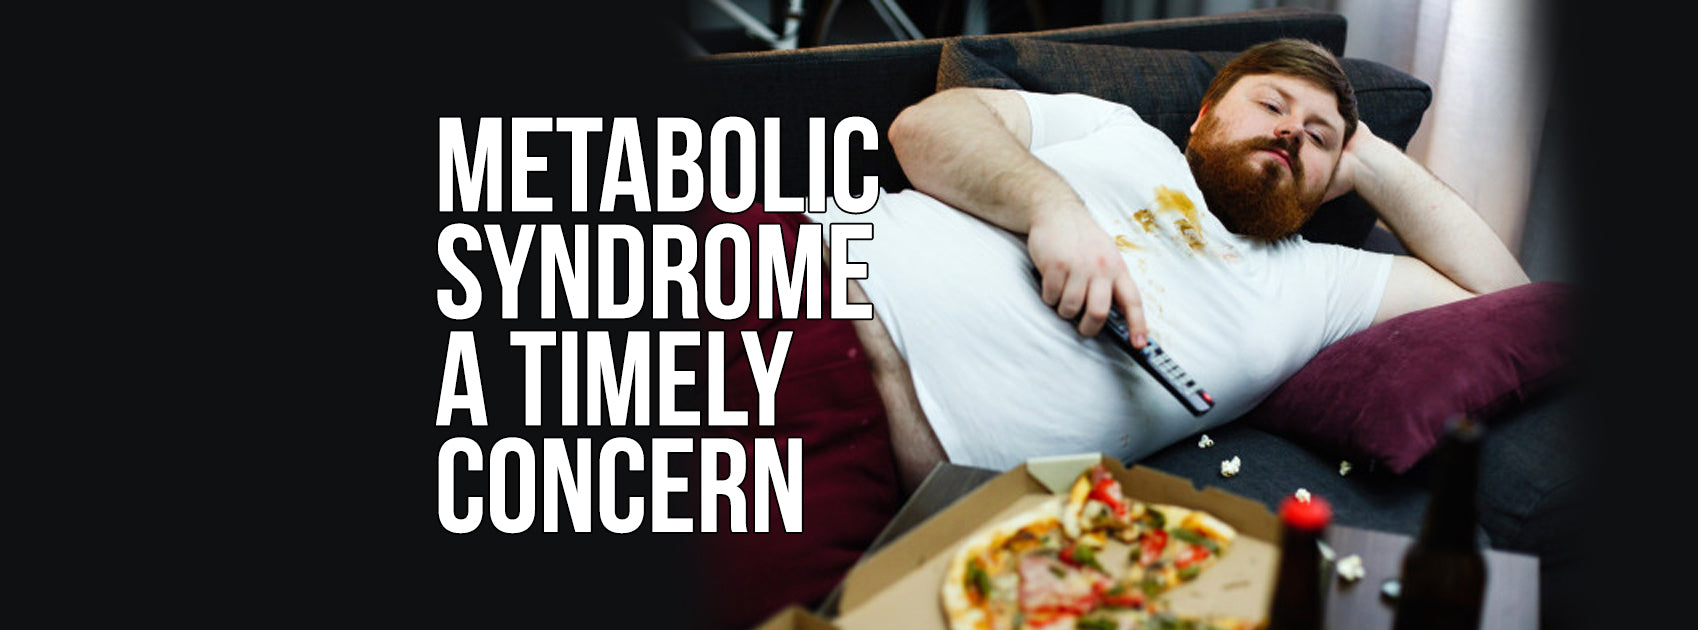 METABOLIC SYNDROME A TIMELY CONCERN & RISK FACTORS